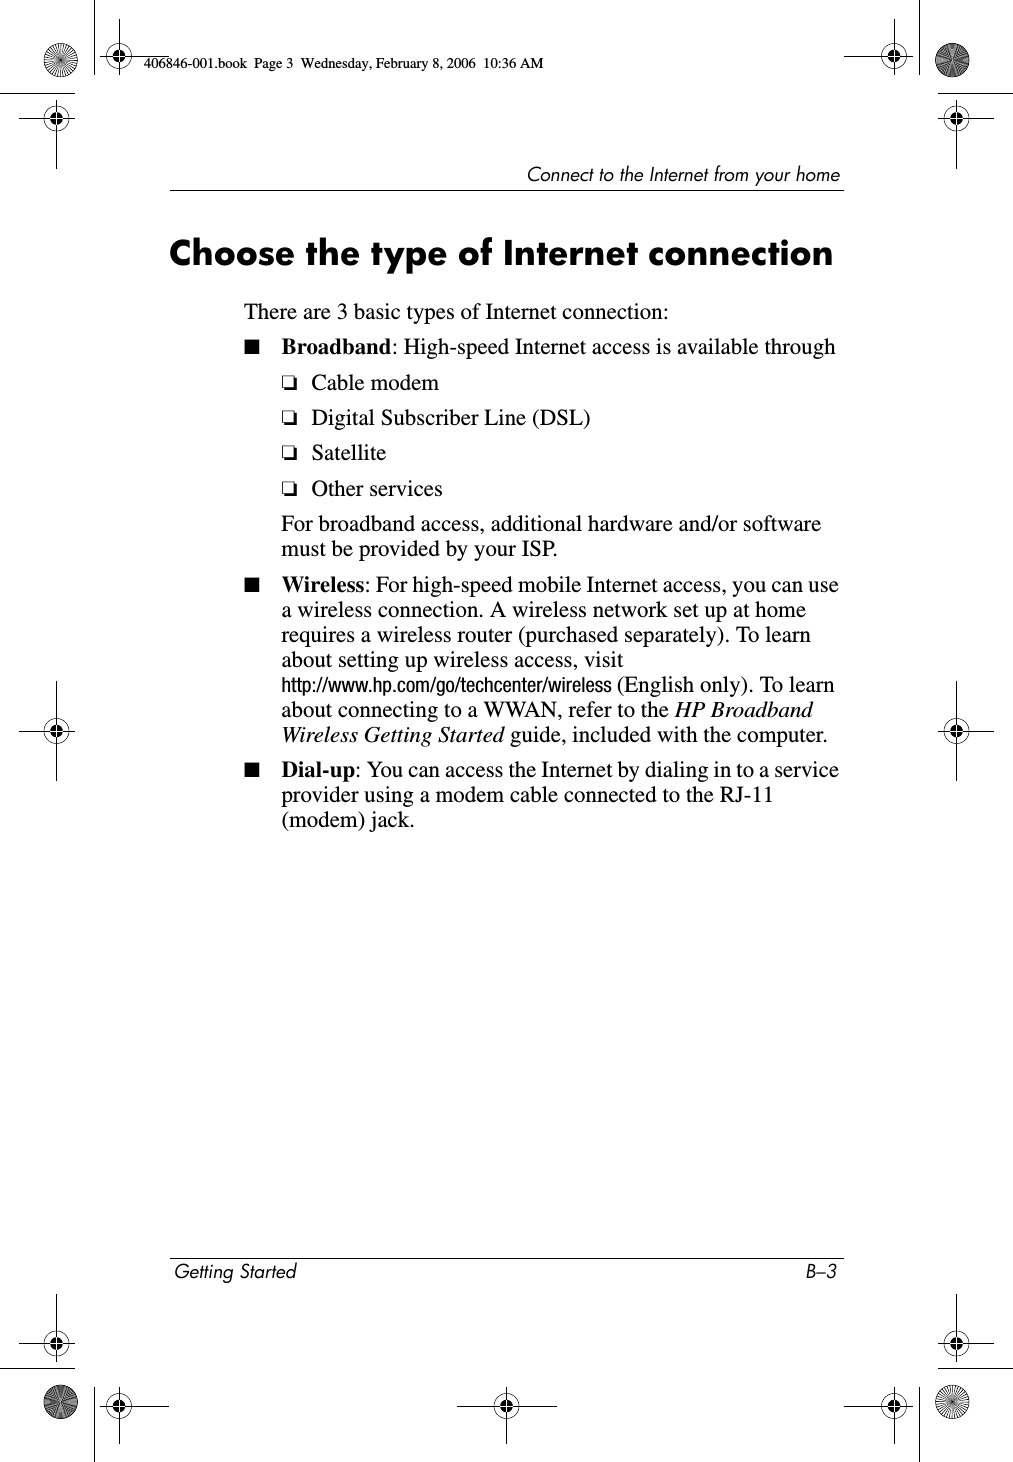 Connect to the Internet from your homeGetting Started B–3Choose the type of Internet connection There are 3 basic types of Internet connection:■Broadband: High-speed Internet access is available through❏Cable modem❏Digital Subscriber Line (DSL)❏Satellite❏Other servicesFor broadband access, additional hardware and/or software must be provided by your ISP. ■Wireless: For high-speed mobile Internet access, you can use a wireless connection. A wireless network set up at home requires a wireless router (purchased separately). To learn about setting up wireless access, visit http://www.hp.com/go/techcenter/wireless (English only). To learn about connecting to a WWAN, refer to the HP Broadband Wireless Getting Started guide, included with the computer.■Dial-up: You can access the Internet by dialing in to a service provider using a modem cable connected to the RJ-11 (modem) jack.406846-001.book  Page 3  Wednesday, February 8, 2006  10:36 AM